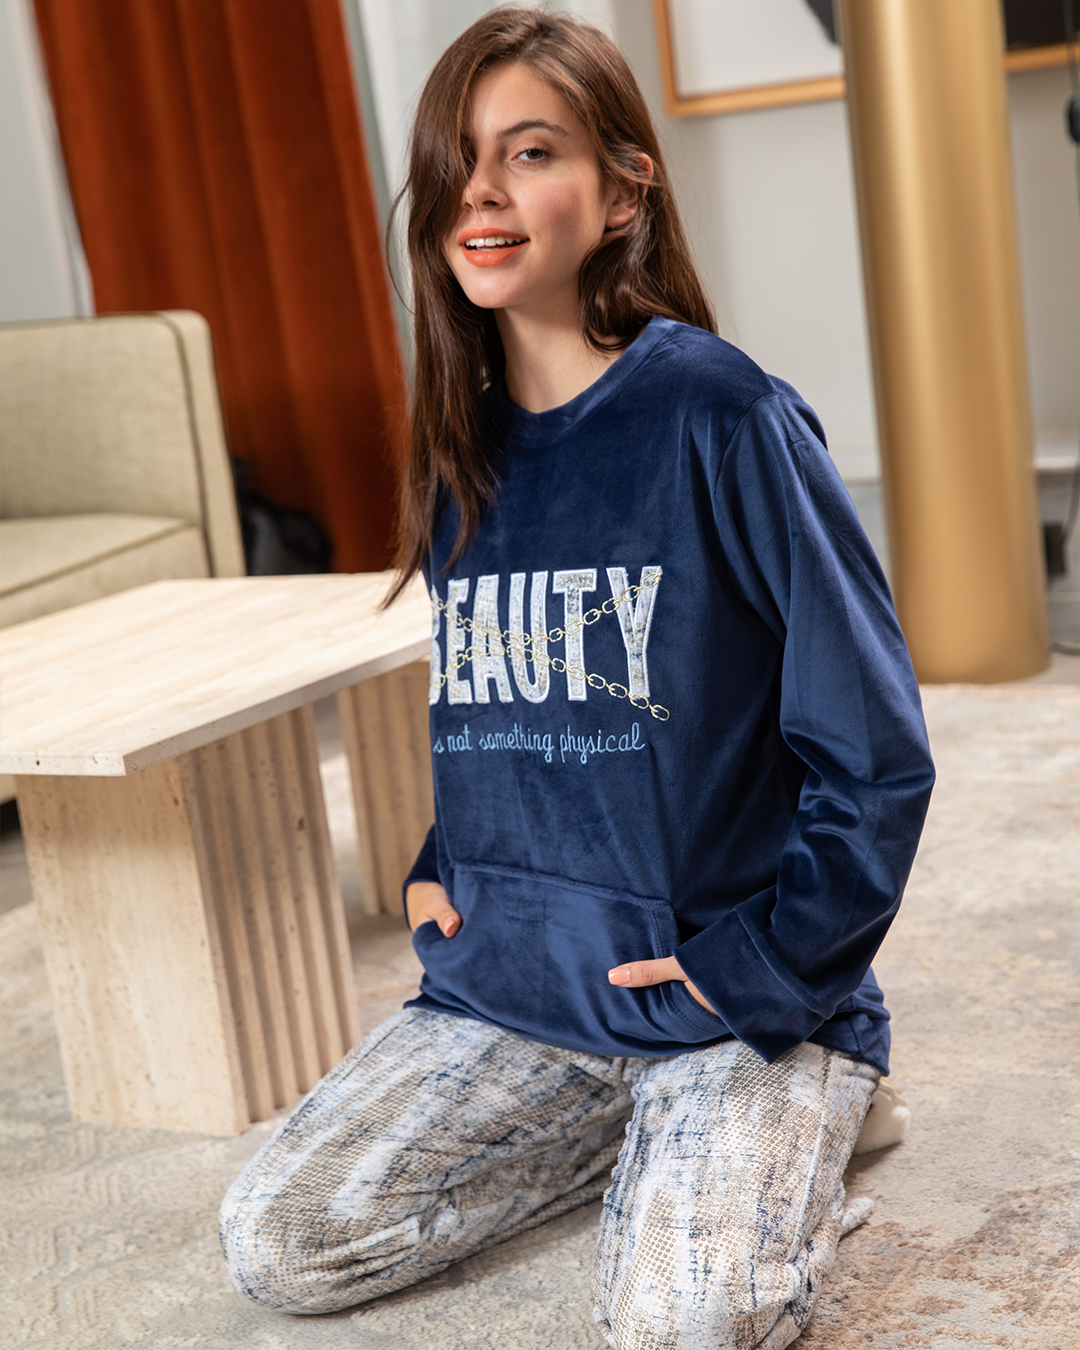 Plush women's pajamas embroidered with a chain